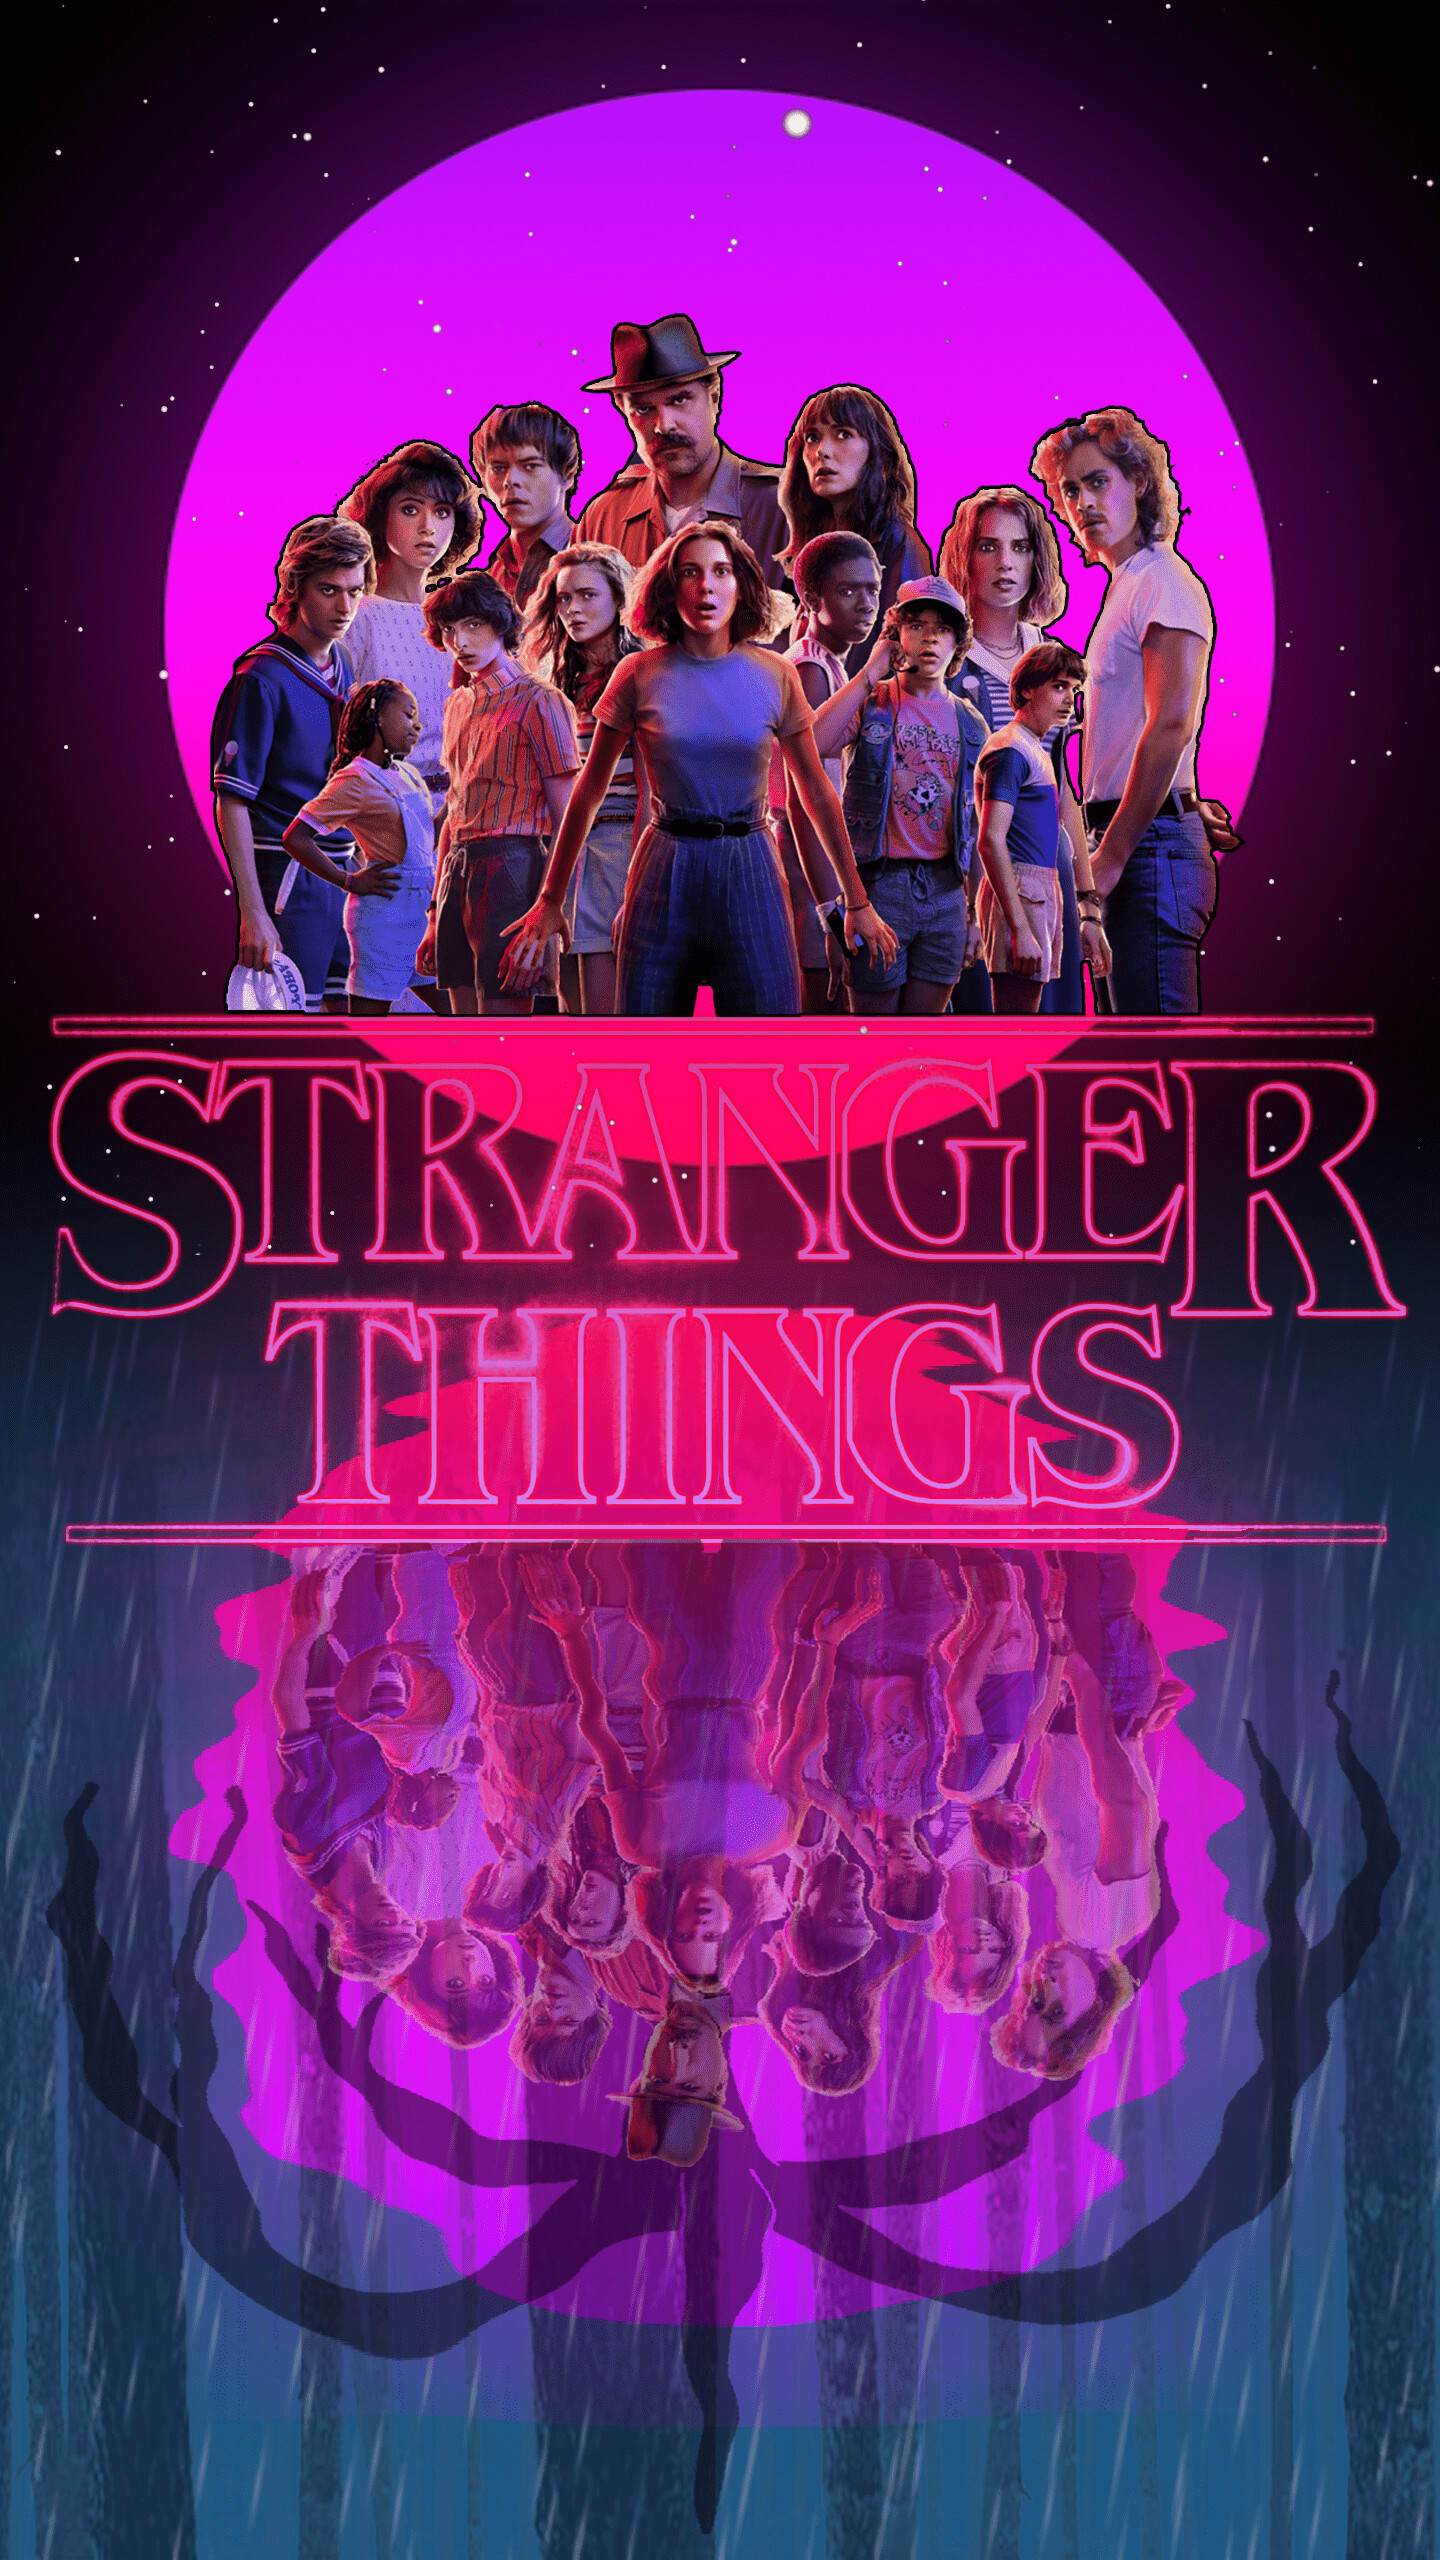 Stranger Things: One of Netflix's flagship series, has attracted record viewership on the streaming platform. 1440x2560 HD Wallpaper.